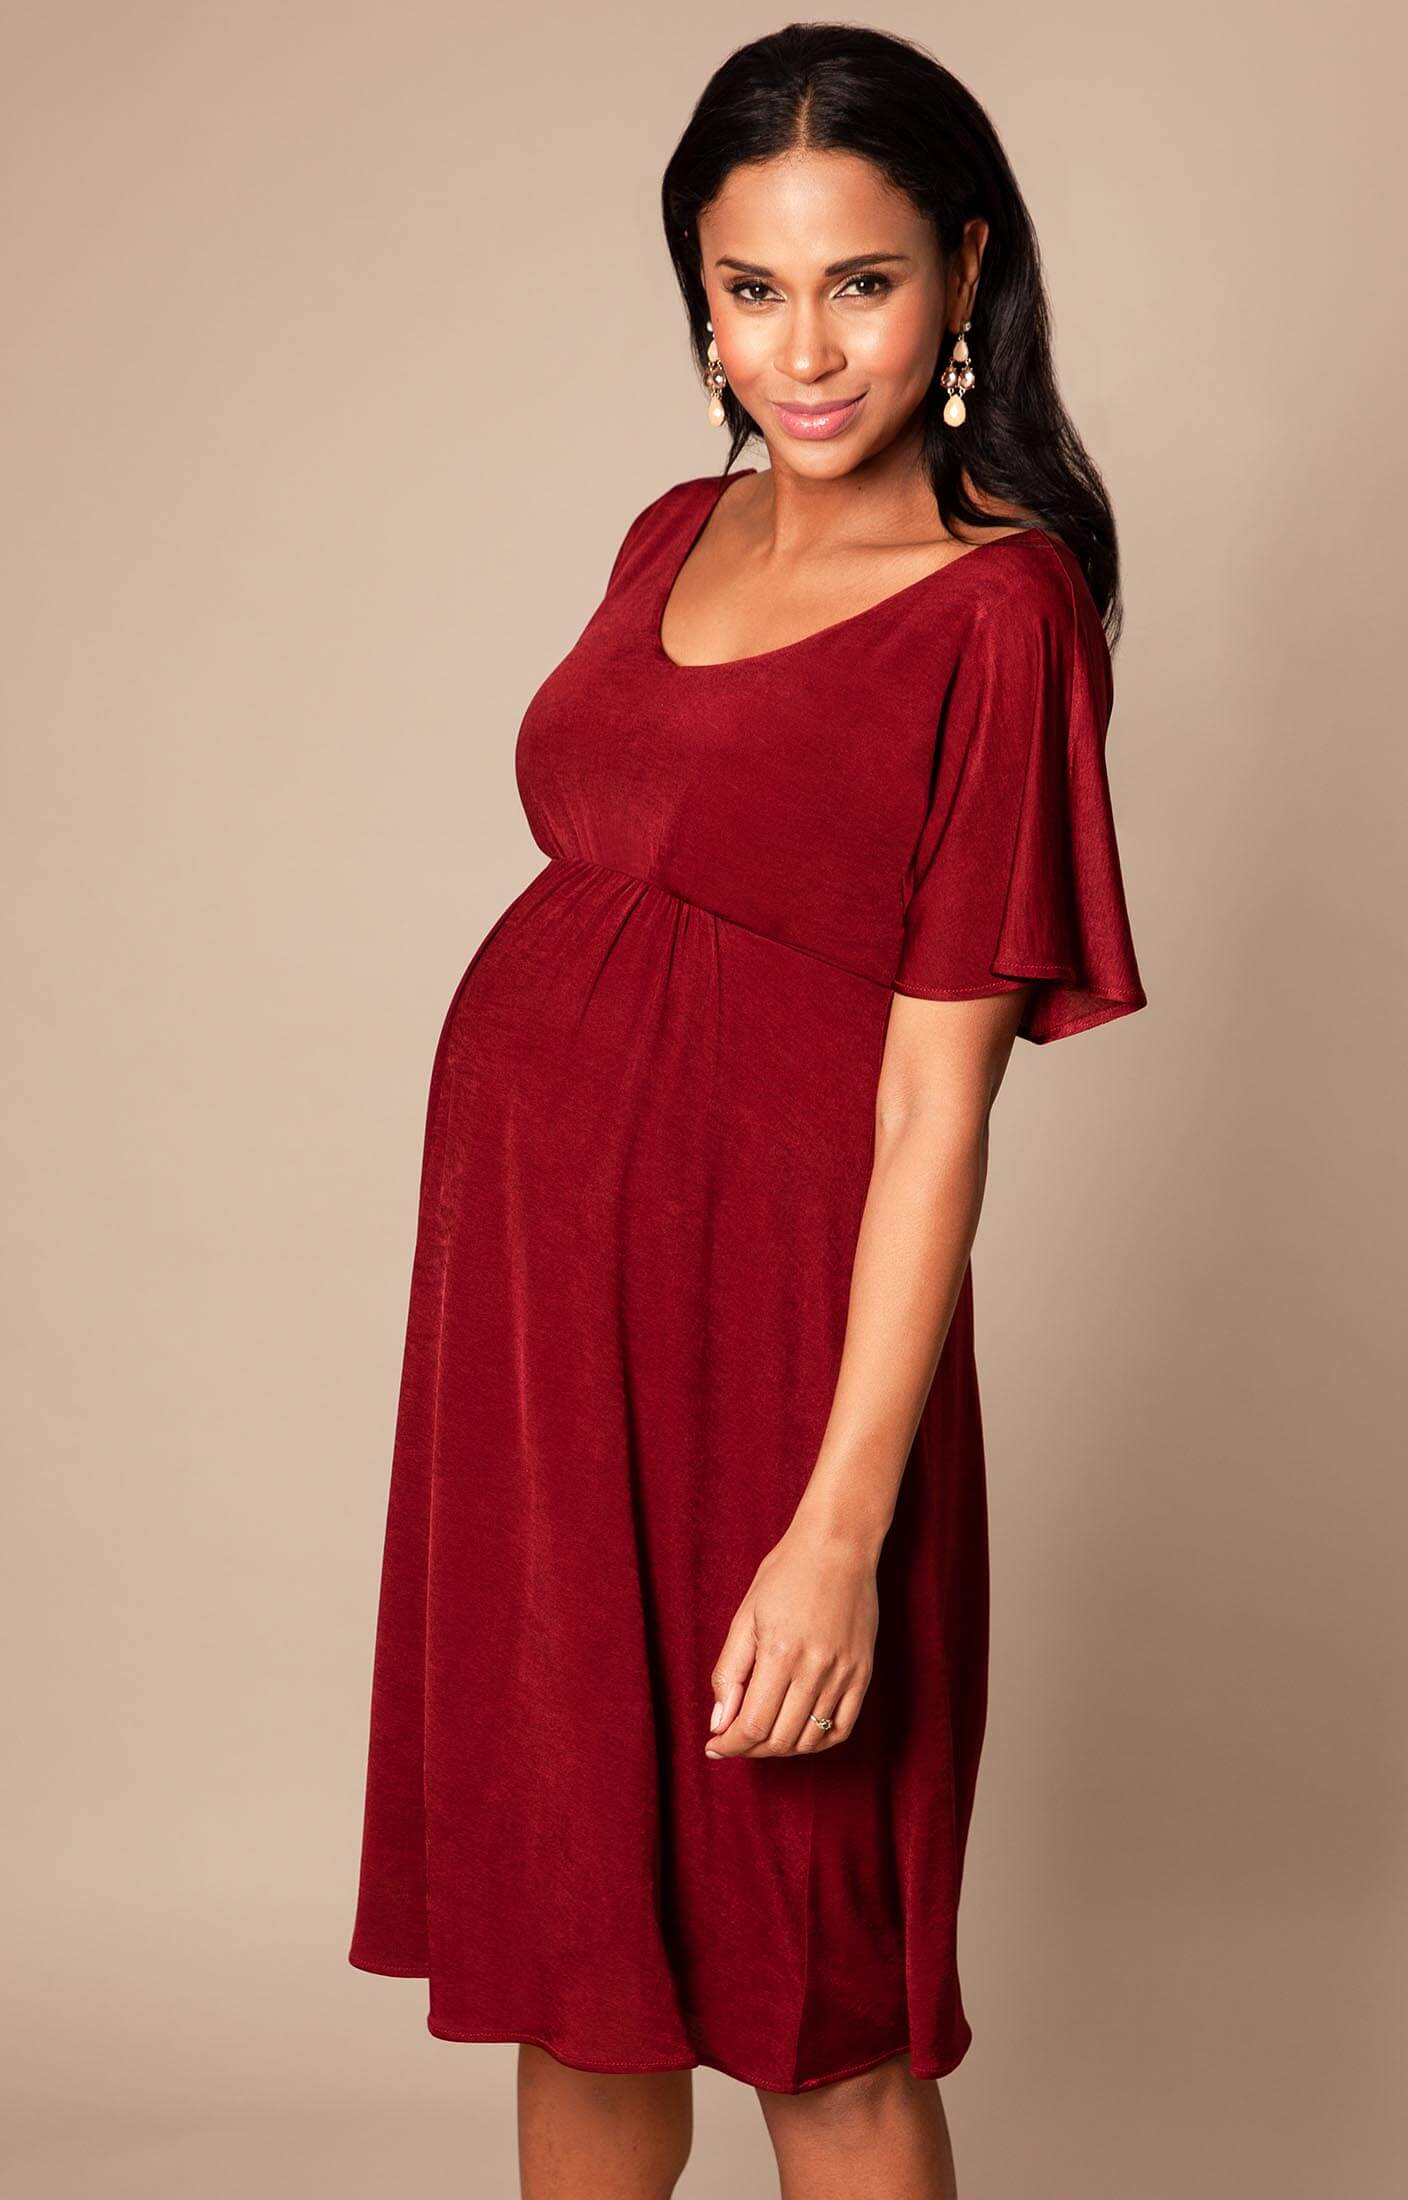 Kimono Maternity Dress short Berry Red - Maternity Wedding Dresses, Evening  Wear and Party Clothes by Tiffany Rose US